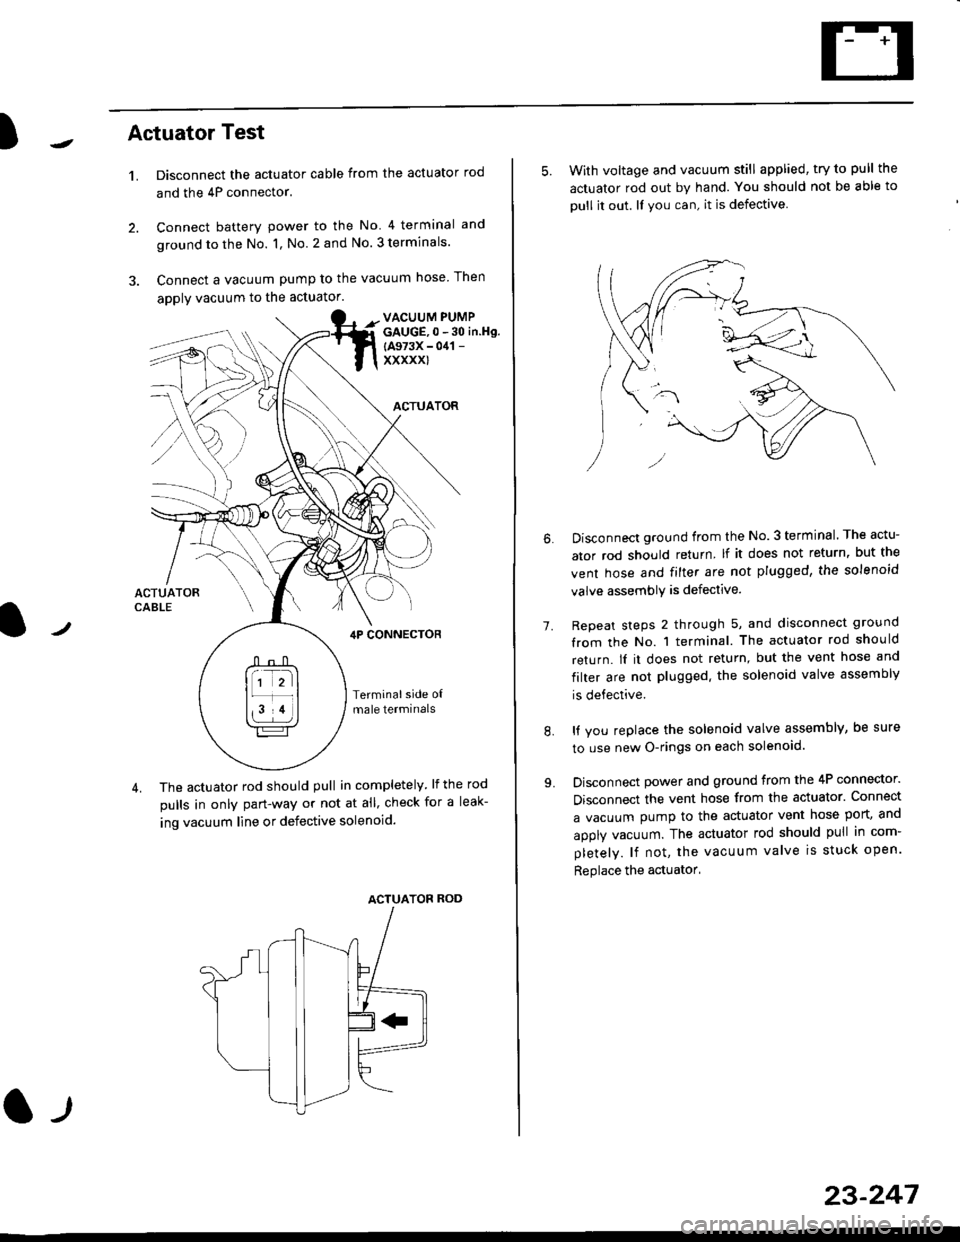 HONDA CIVIC 2000 6.G Workshop Manual )Actuator Test
t.Disconnect the actuator cable from the actuator rod
and the 4P connector.
Connect battery power to the No 4 terminal and
ground to the No. 1, No. 2 and No. 3 terminals.
Connect a vac